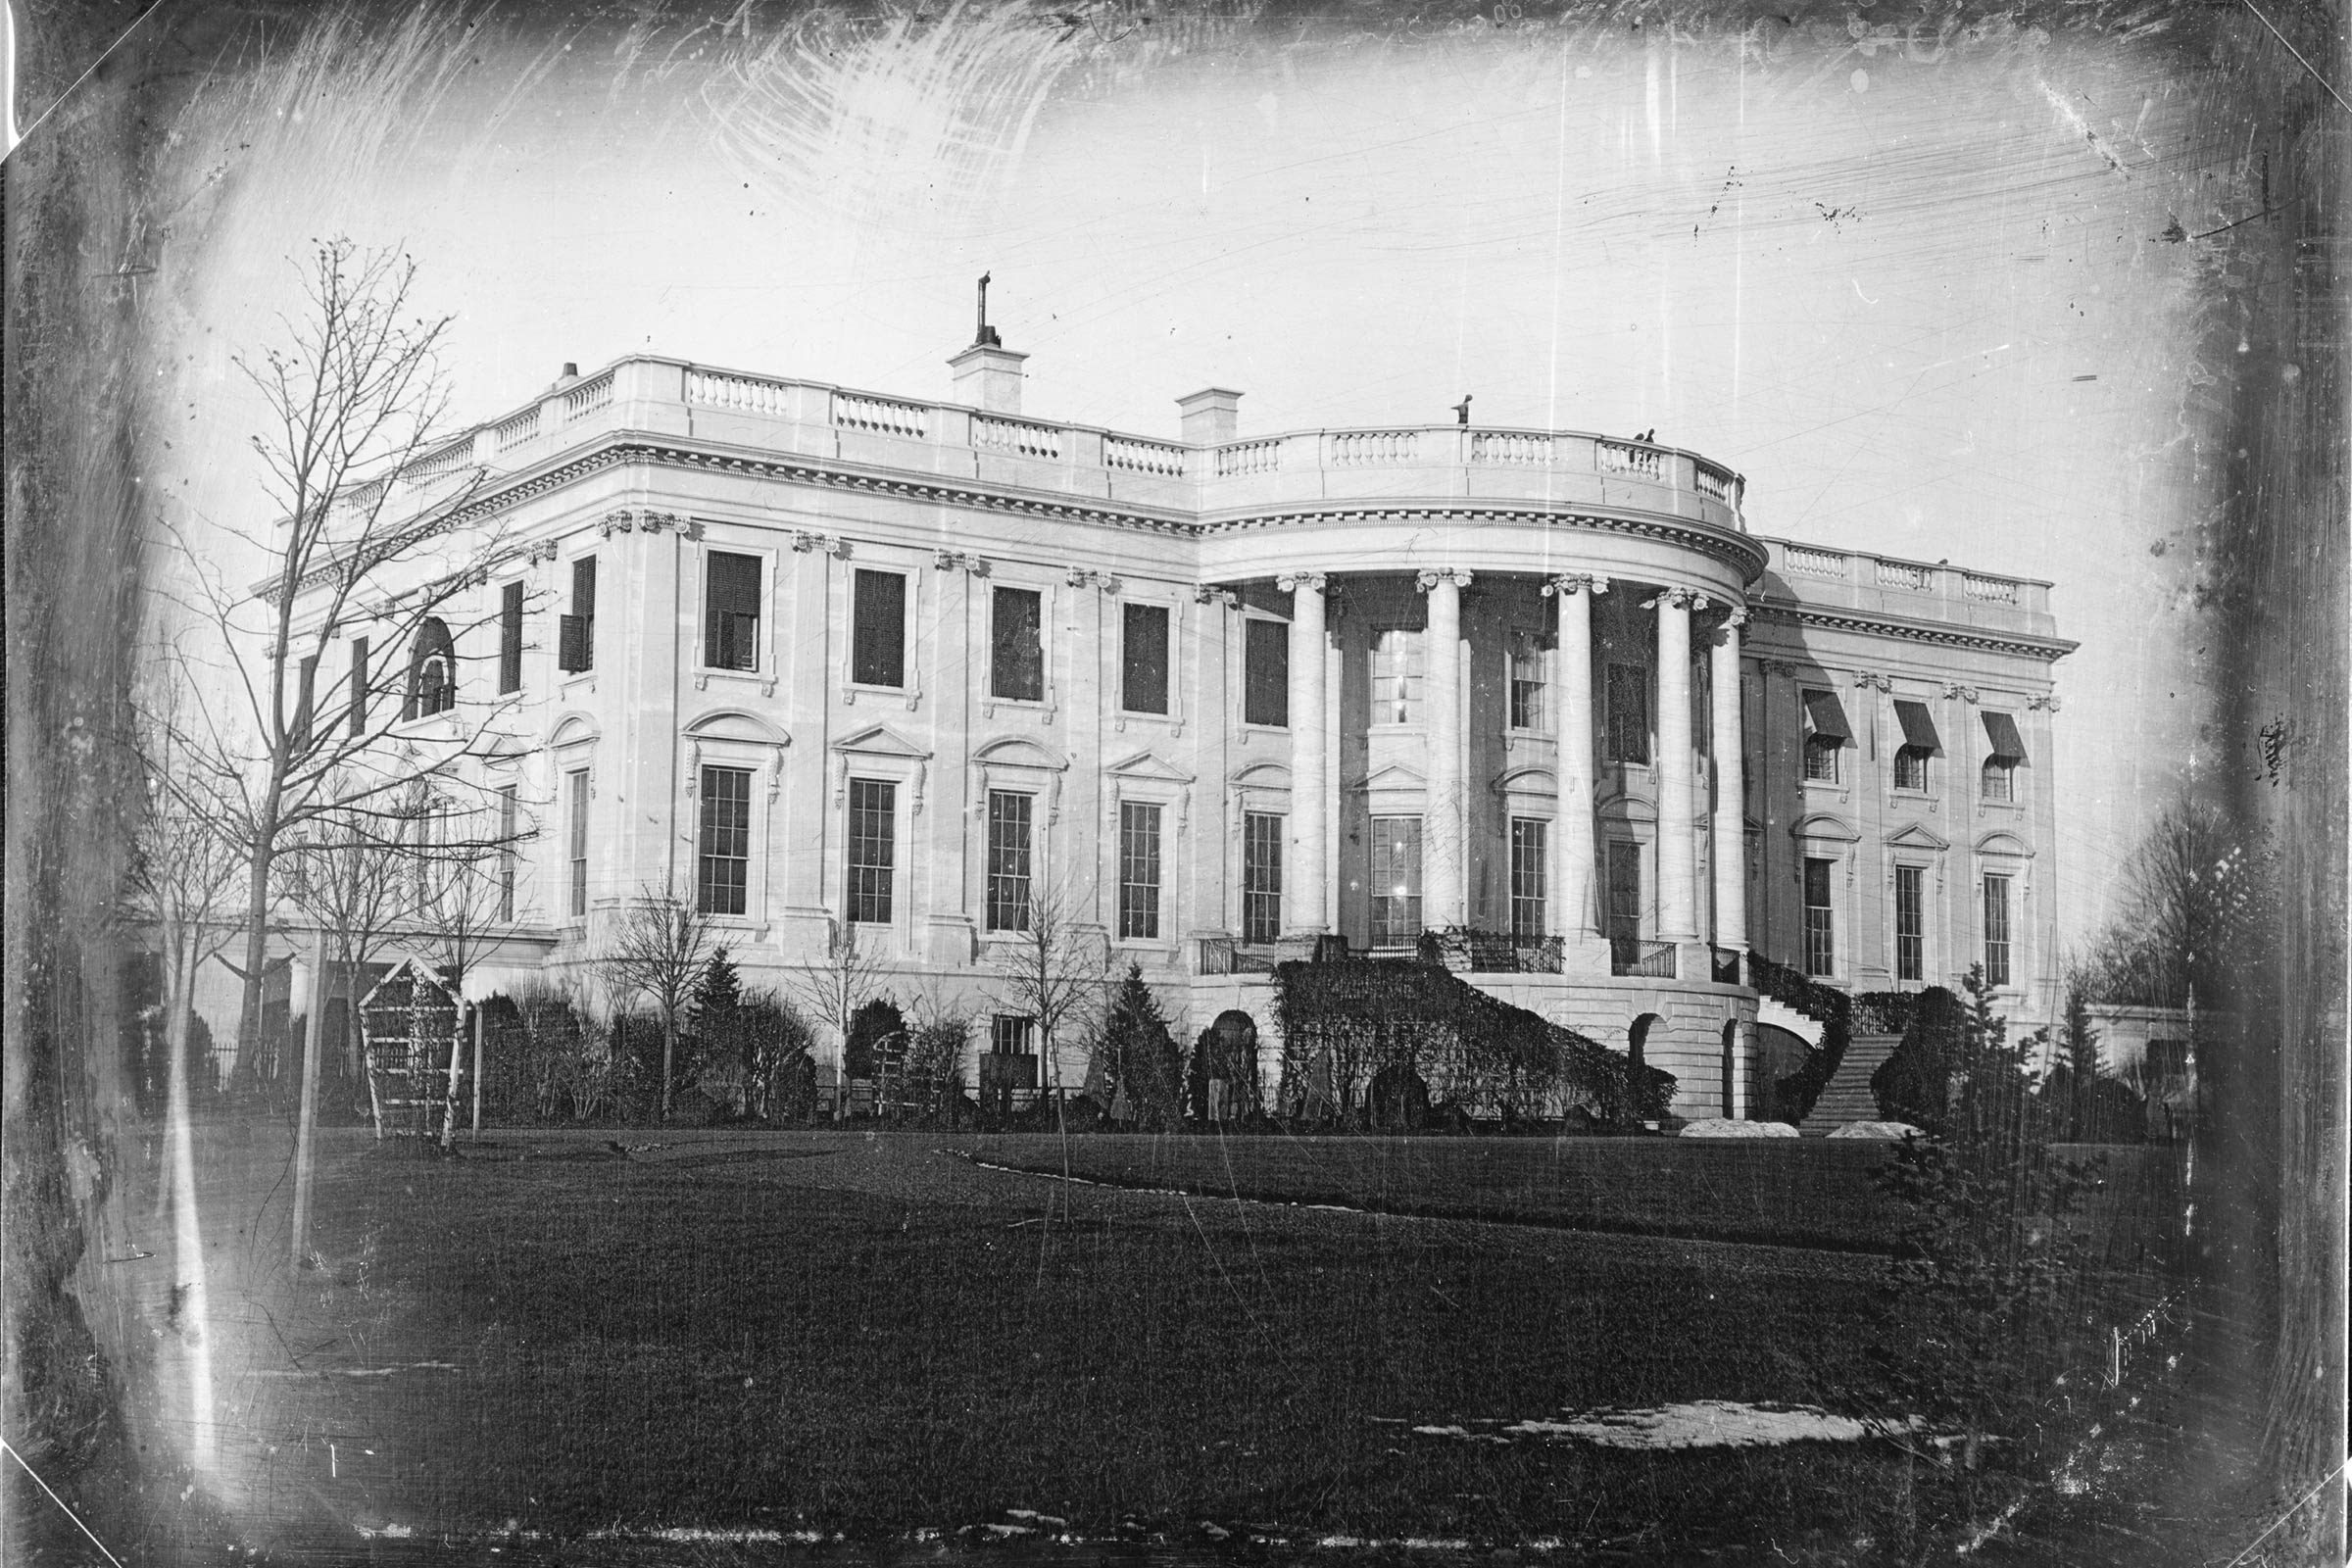 6 Things You May Not Know About the White House